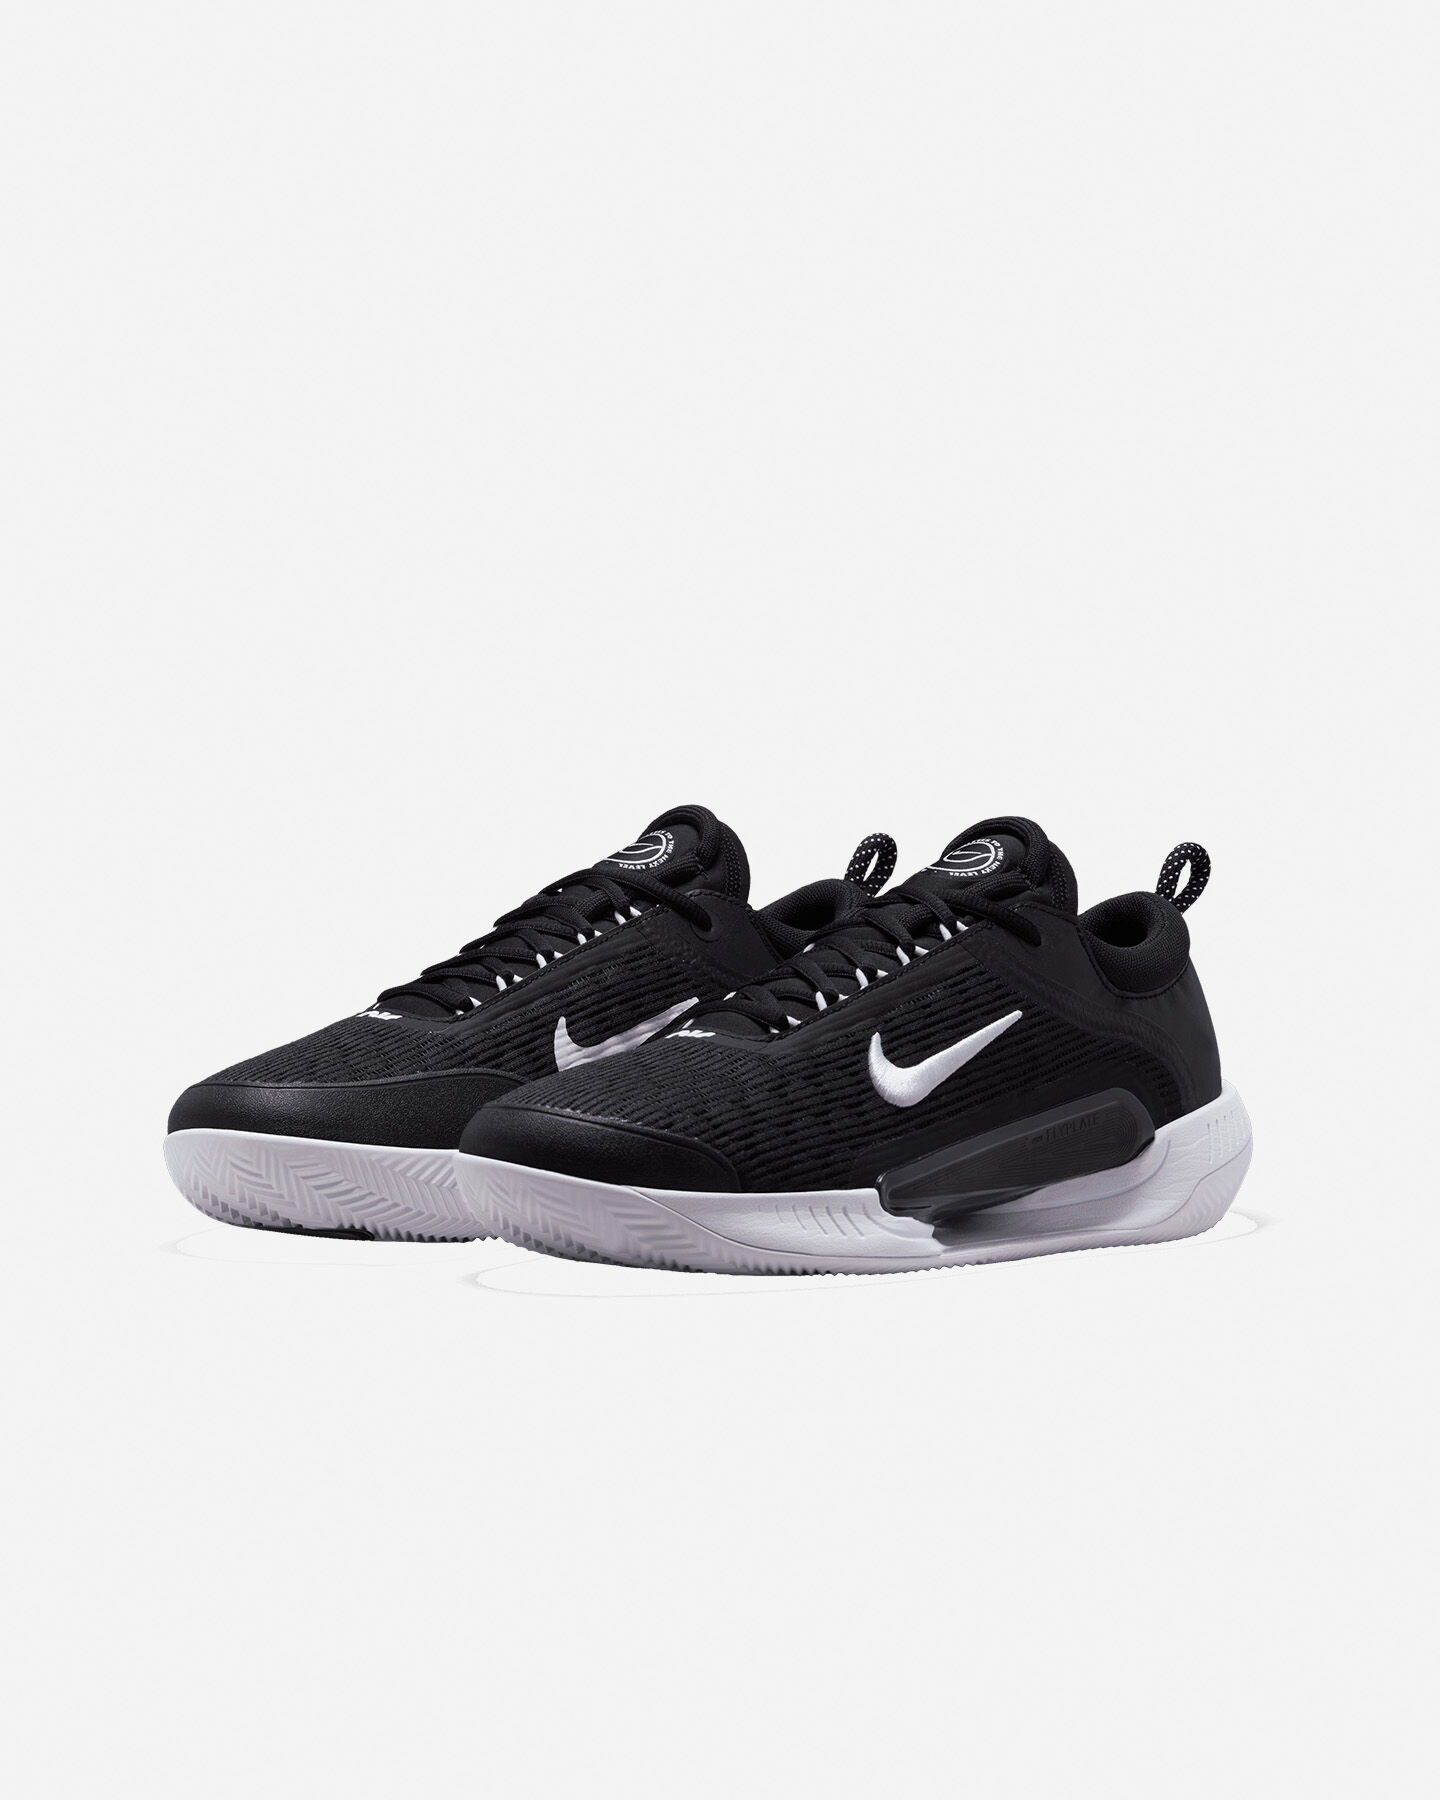  Scarpe tennis NIKE ZOOM COURT NXT CLAY M S5539651|001|6 scatto 1